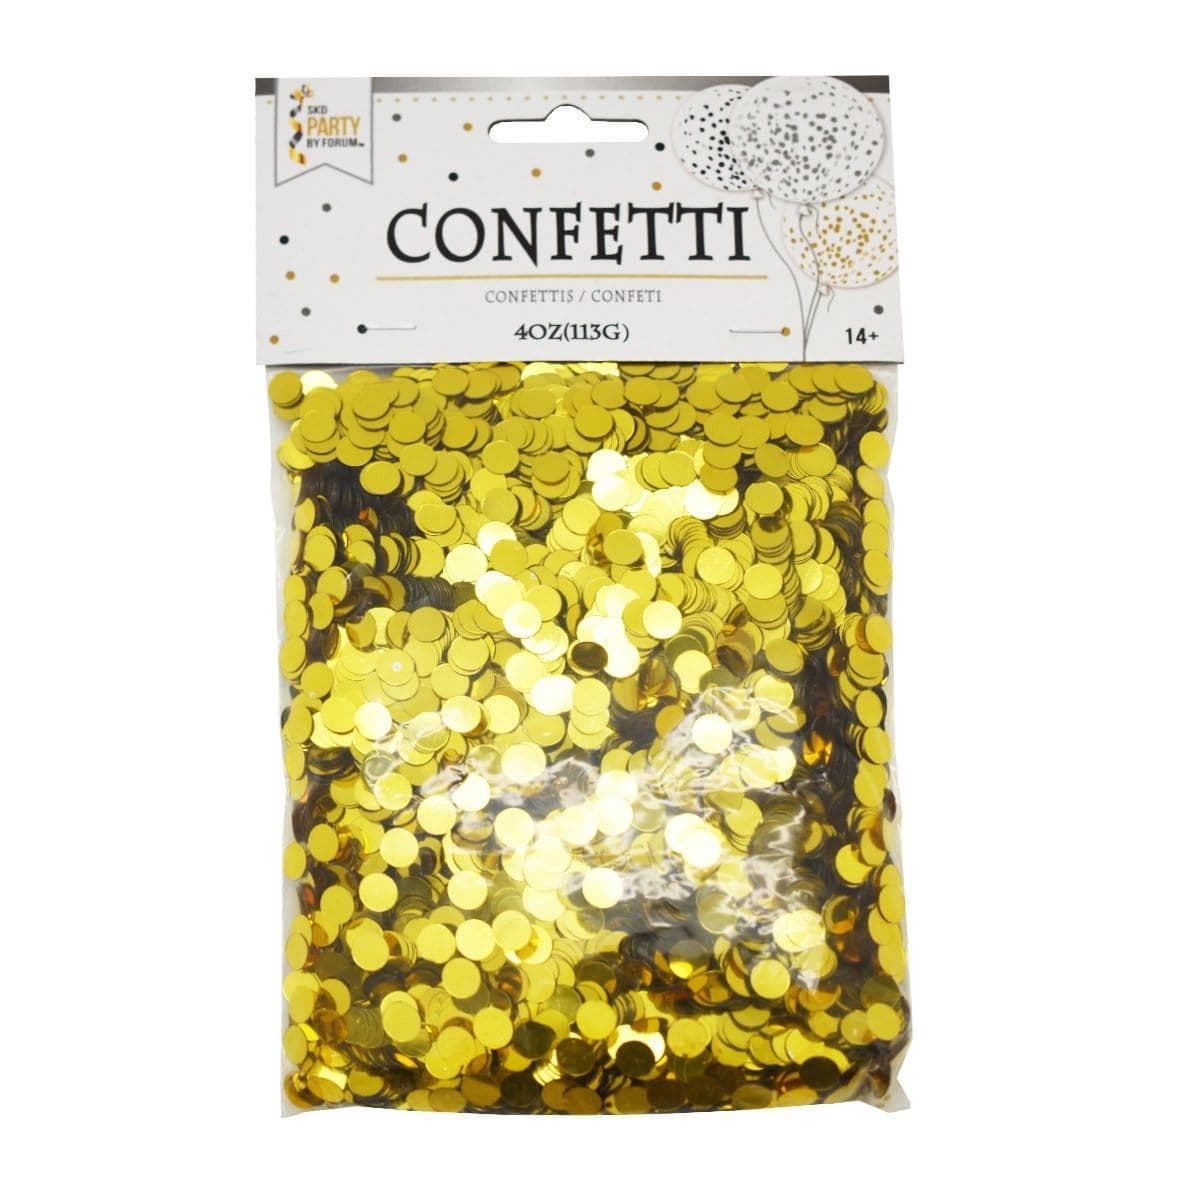 http://www.party-expert.com/cdn/shop/products/skd-party-by-forum-decorations-dot-confetti-4-oz-gold-749567969190-14089951805500.jpg?v=1655705519&width=1200